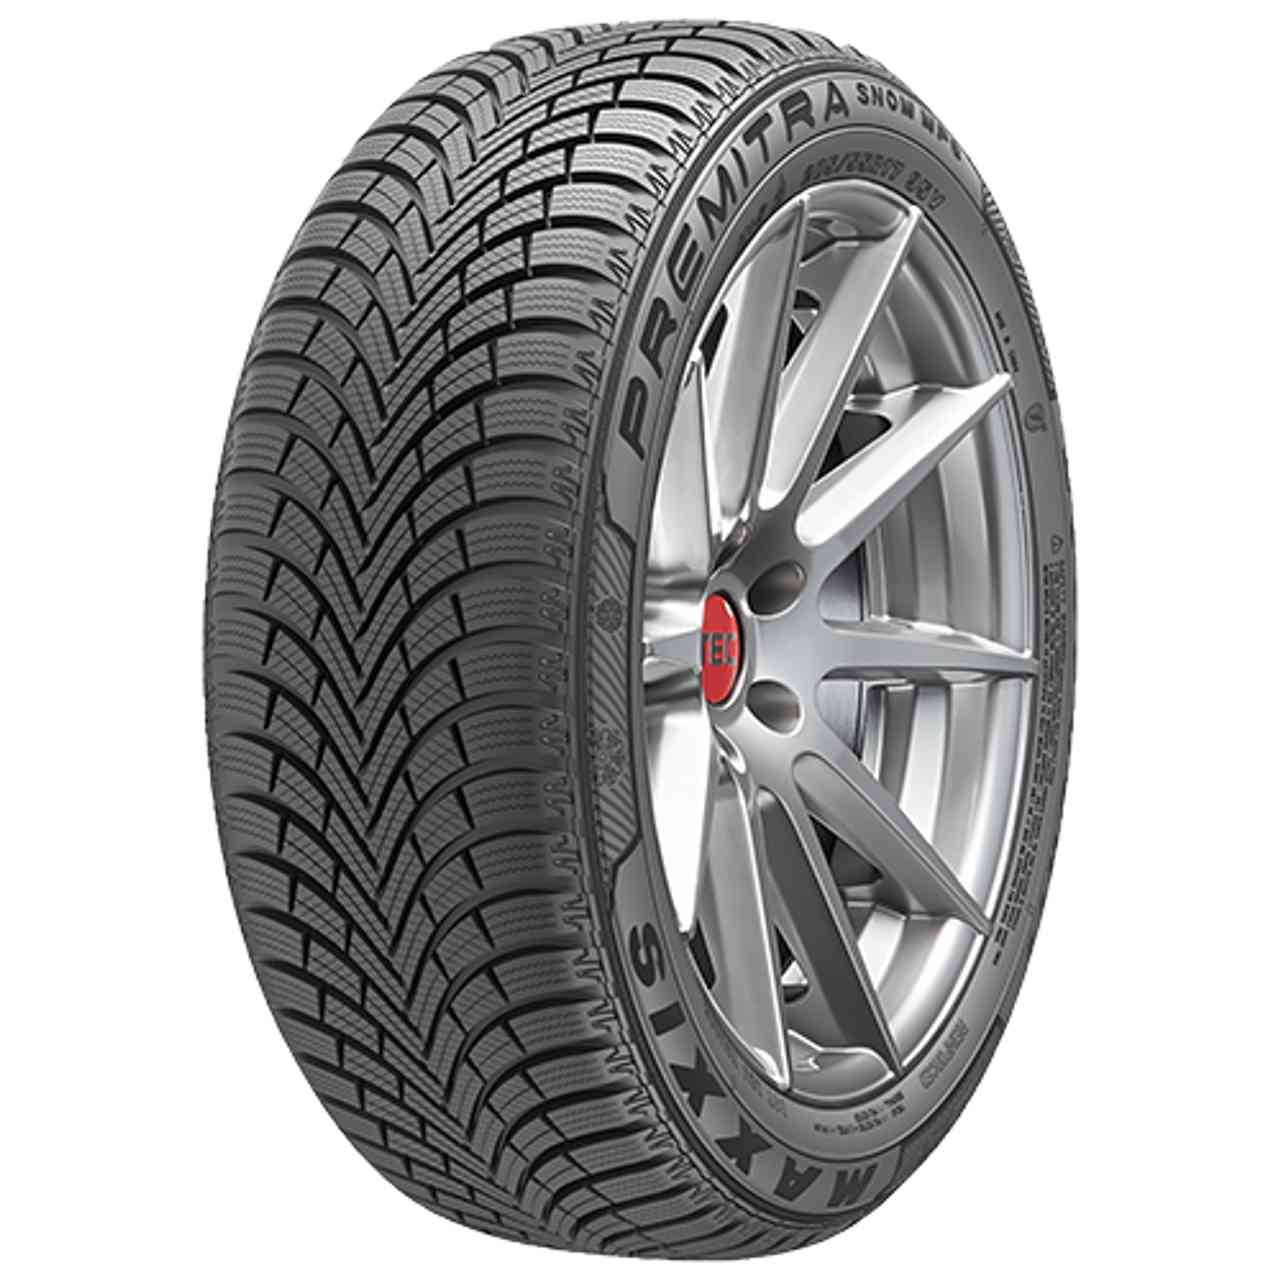 MAXXIS PREMITRA SNOW WP6 215/55R17 98V BSW von MAXXIS